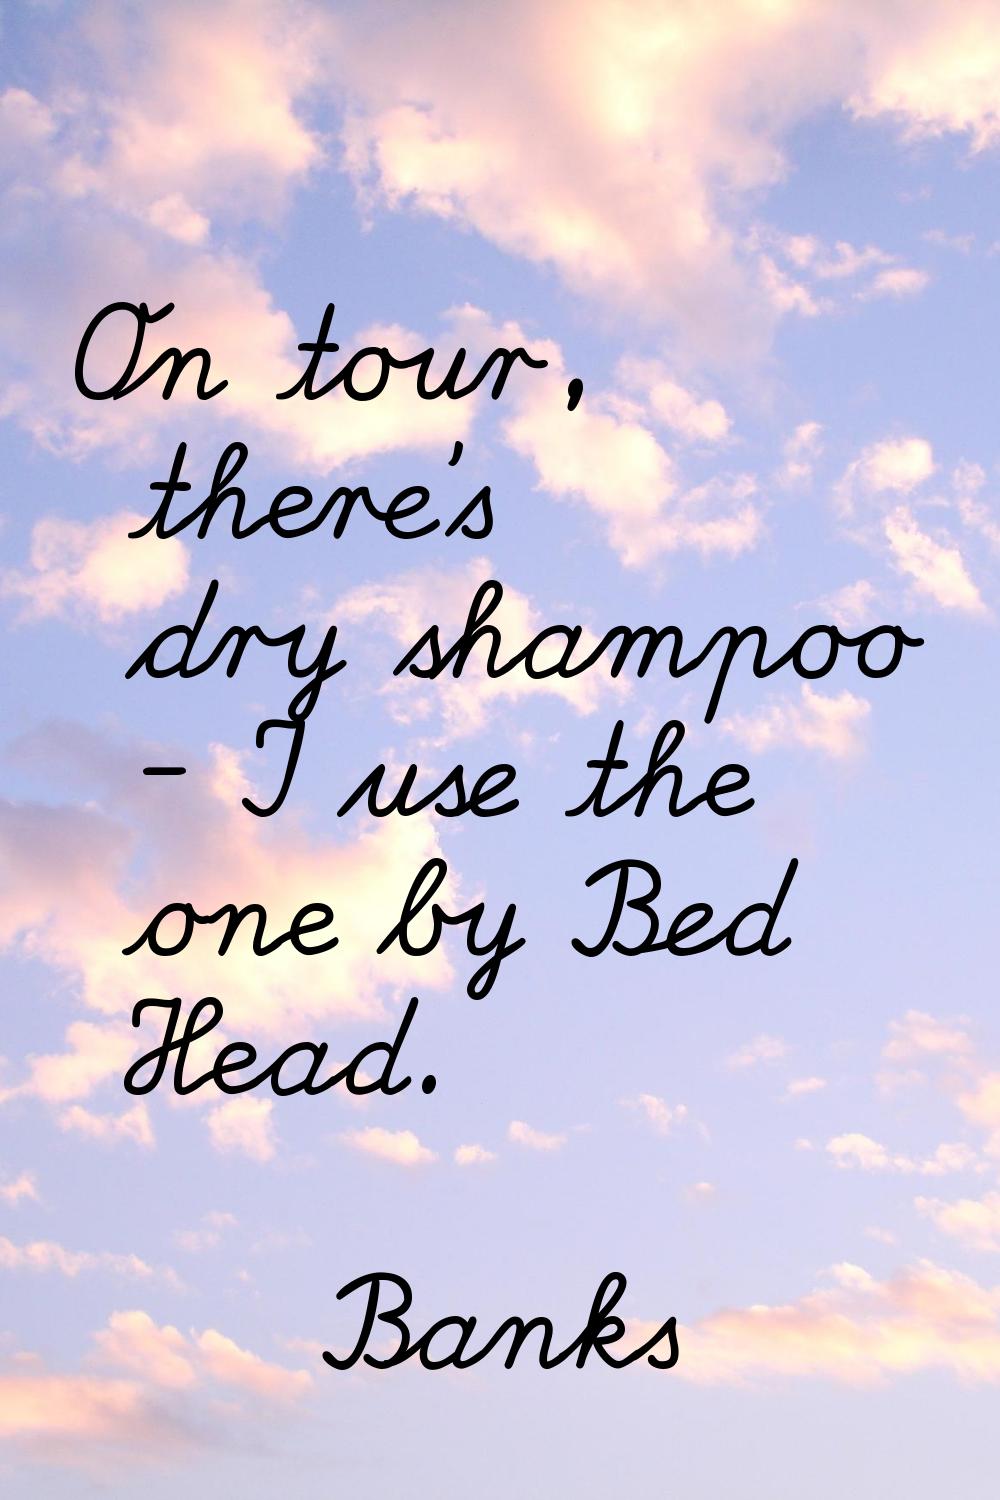 On tour, there's dry shampoo - I use the one by Bed Head.